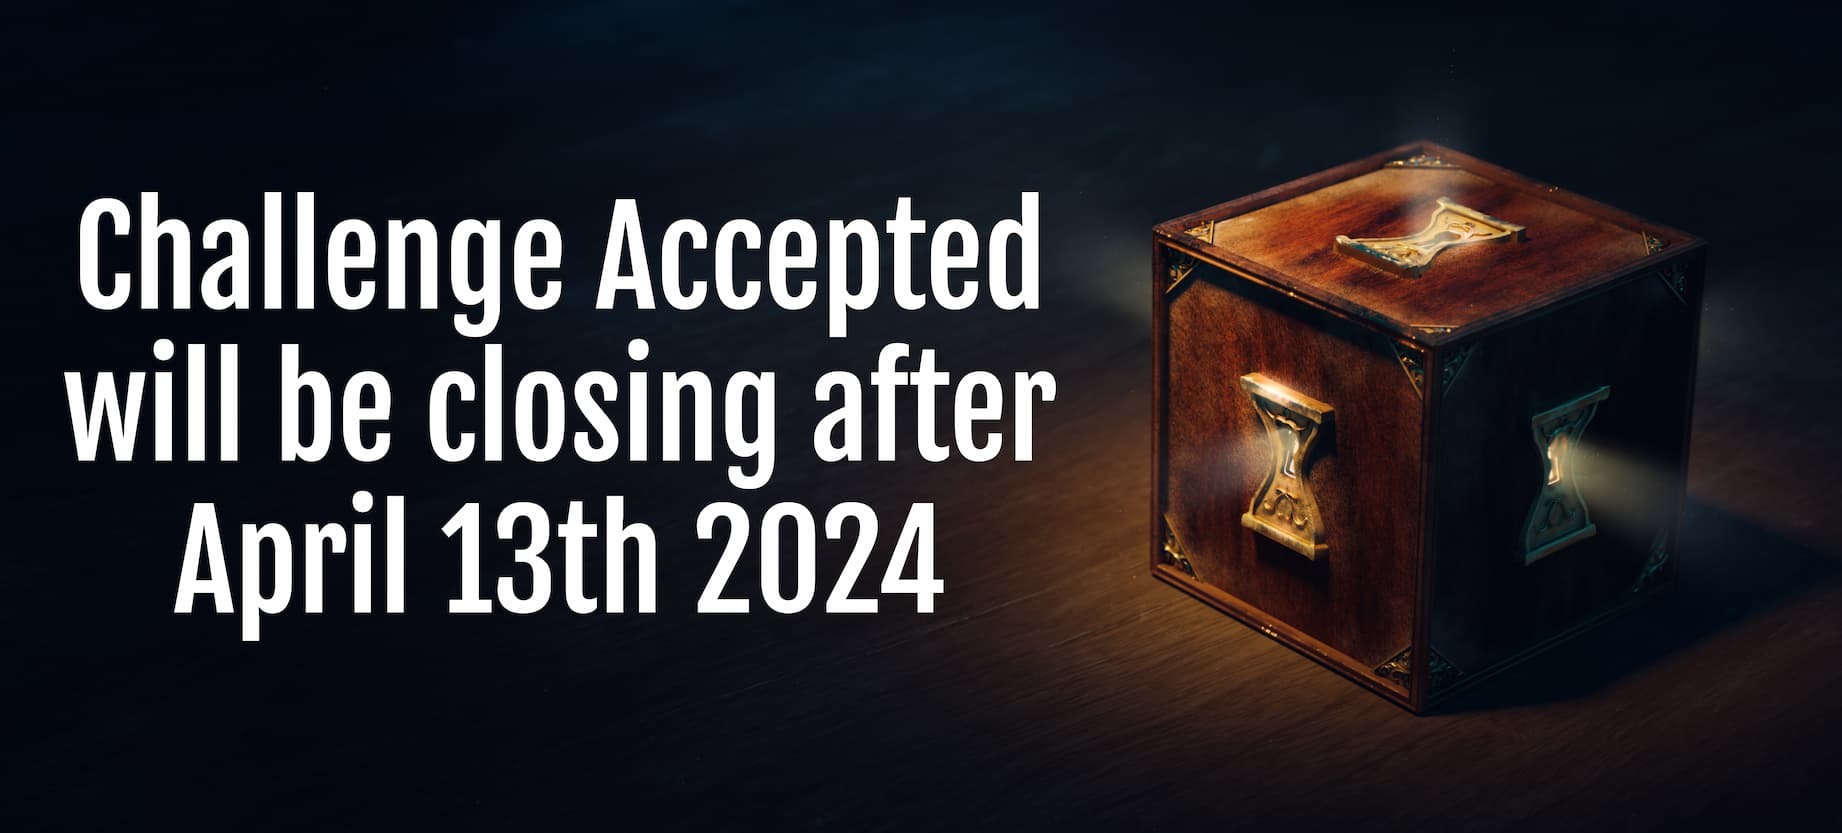 Challenge Accepted will be closing after April 13th 2024